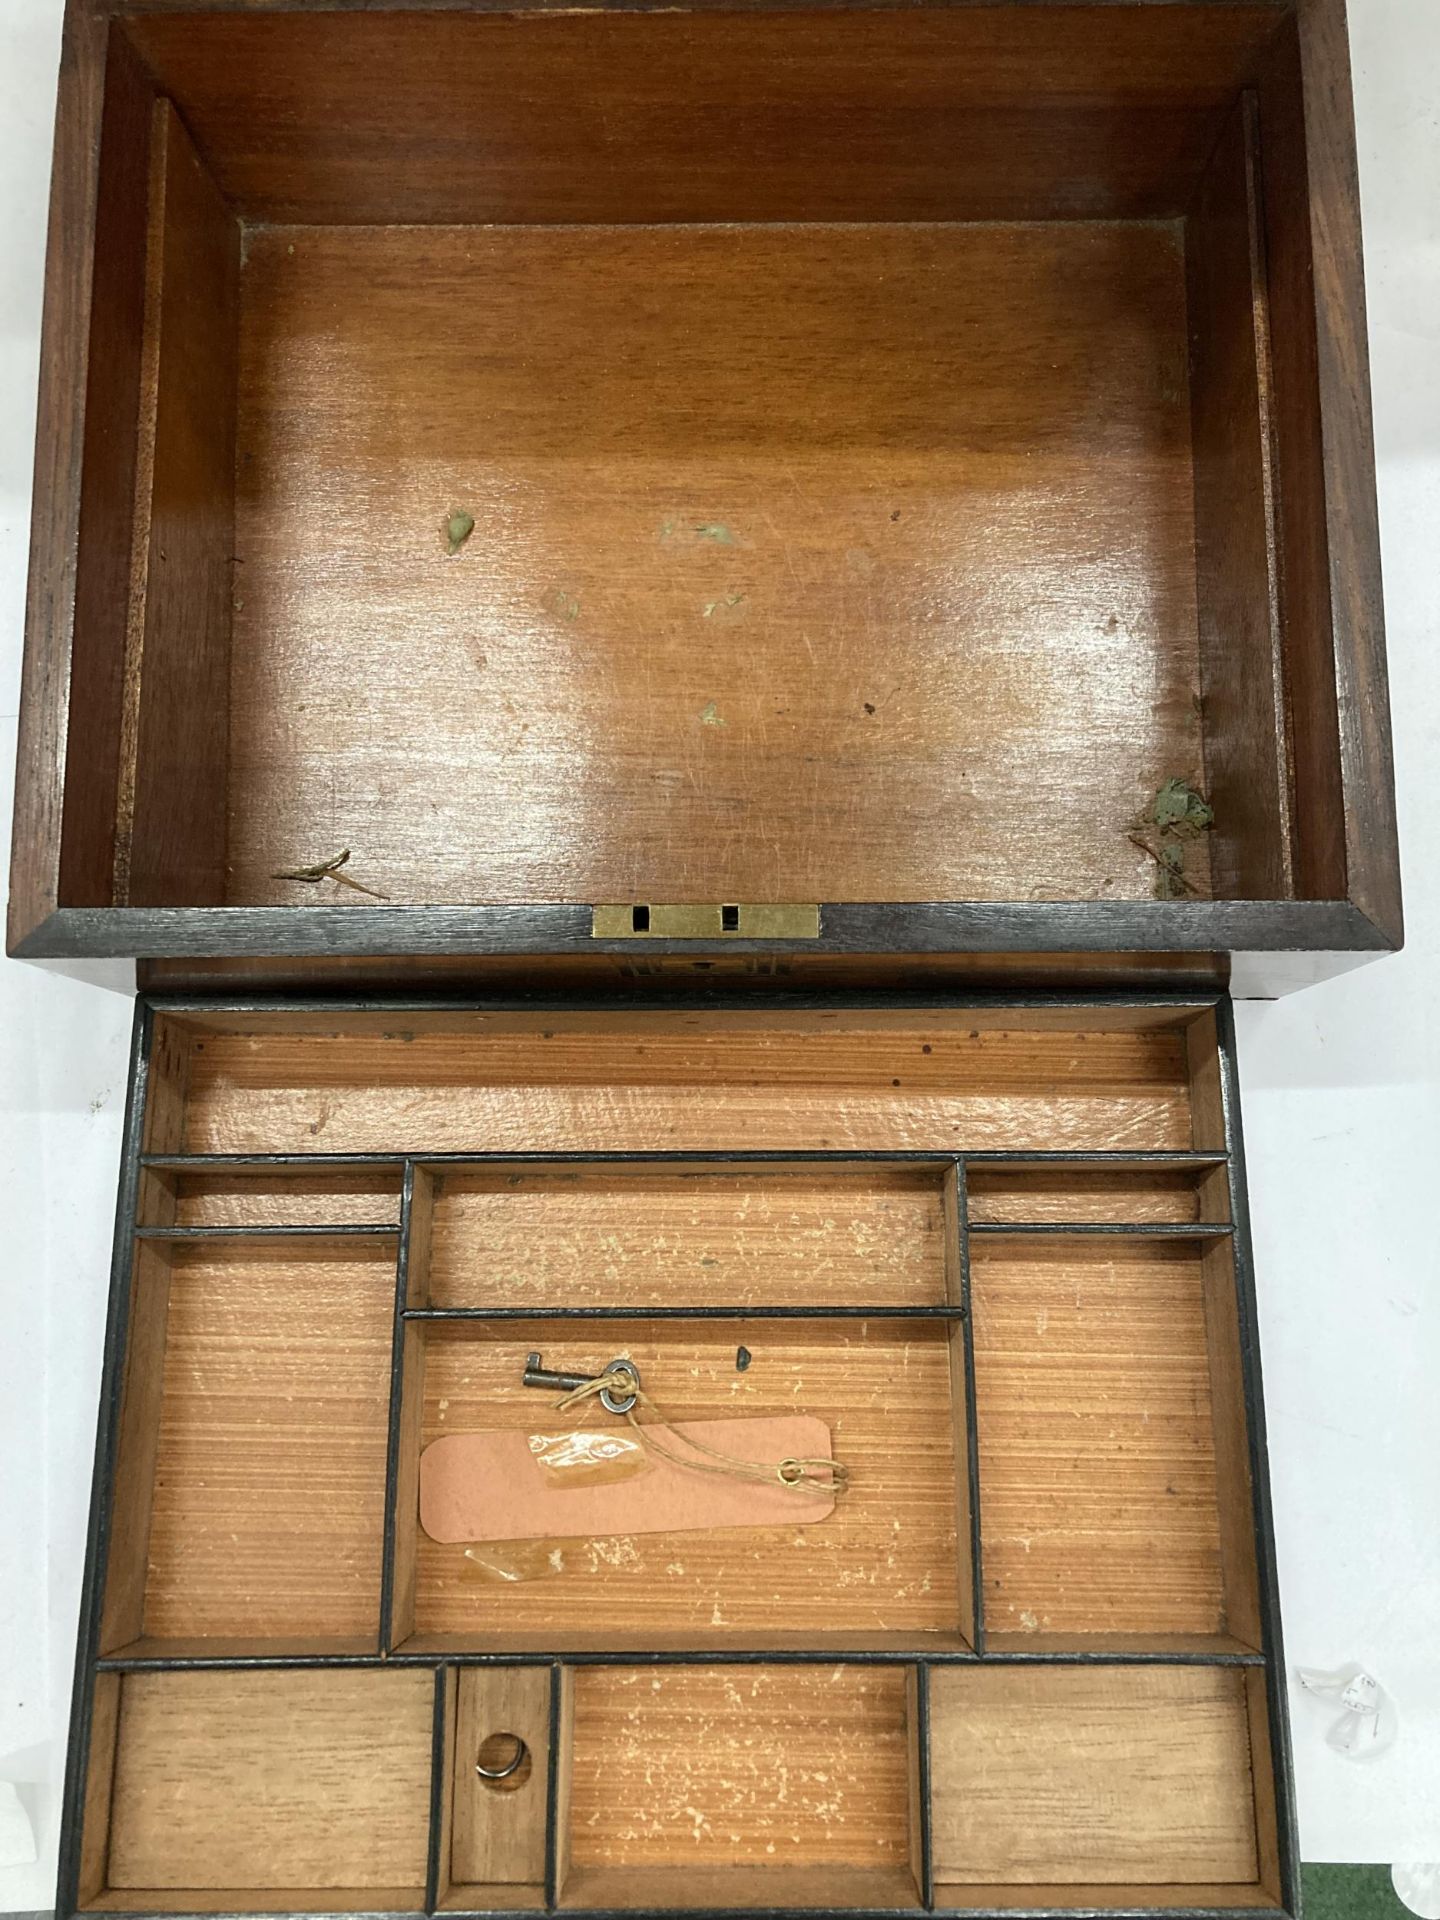 A VINTAGE WALNUT JEWLLERY BOX WITH INNER LIFT OUT SECTION AND KEY - Image 4 of 5